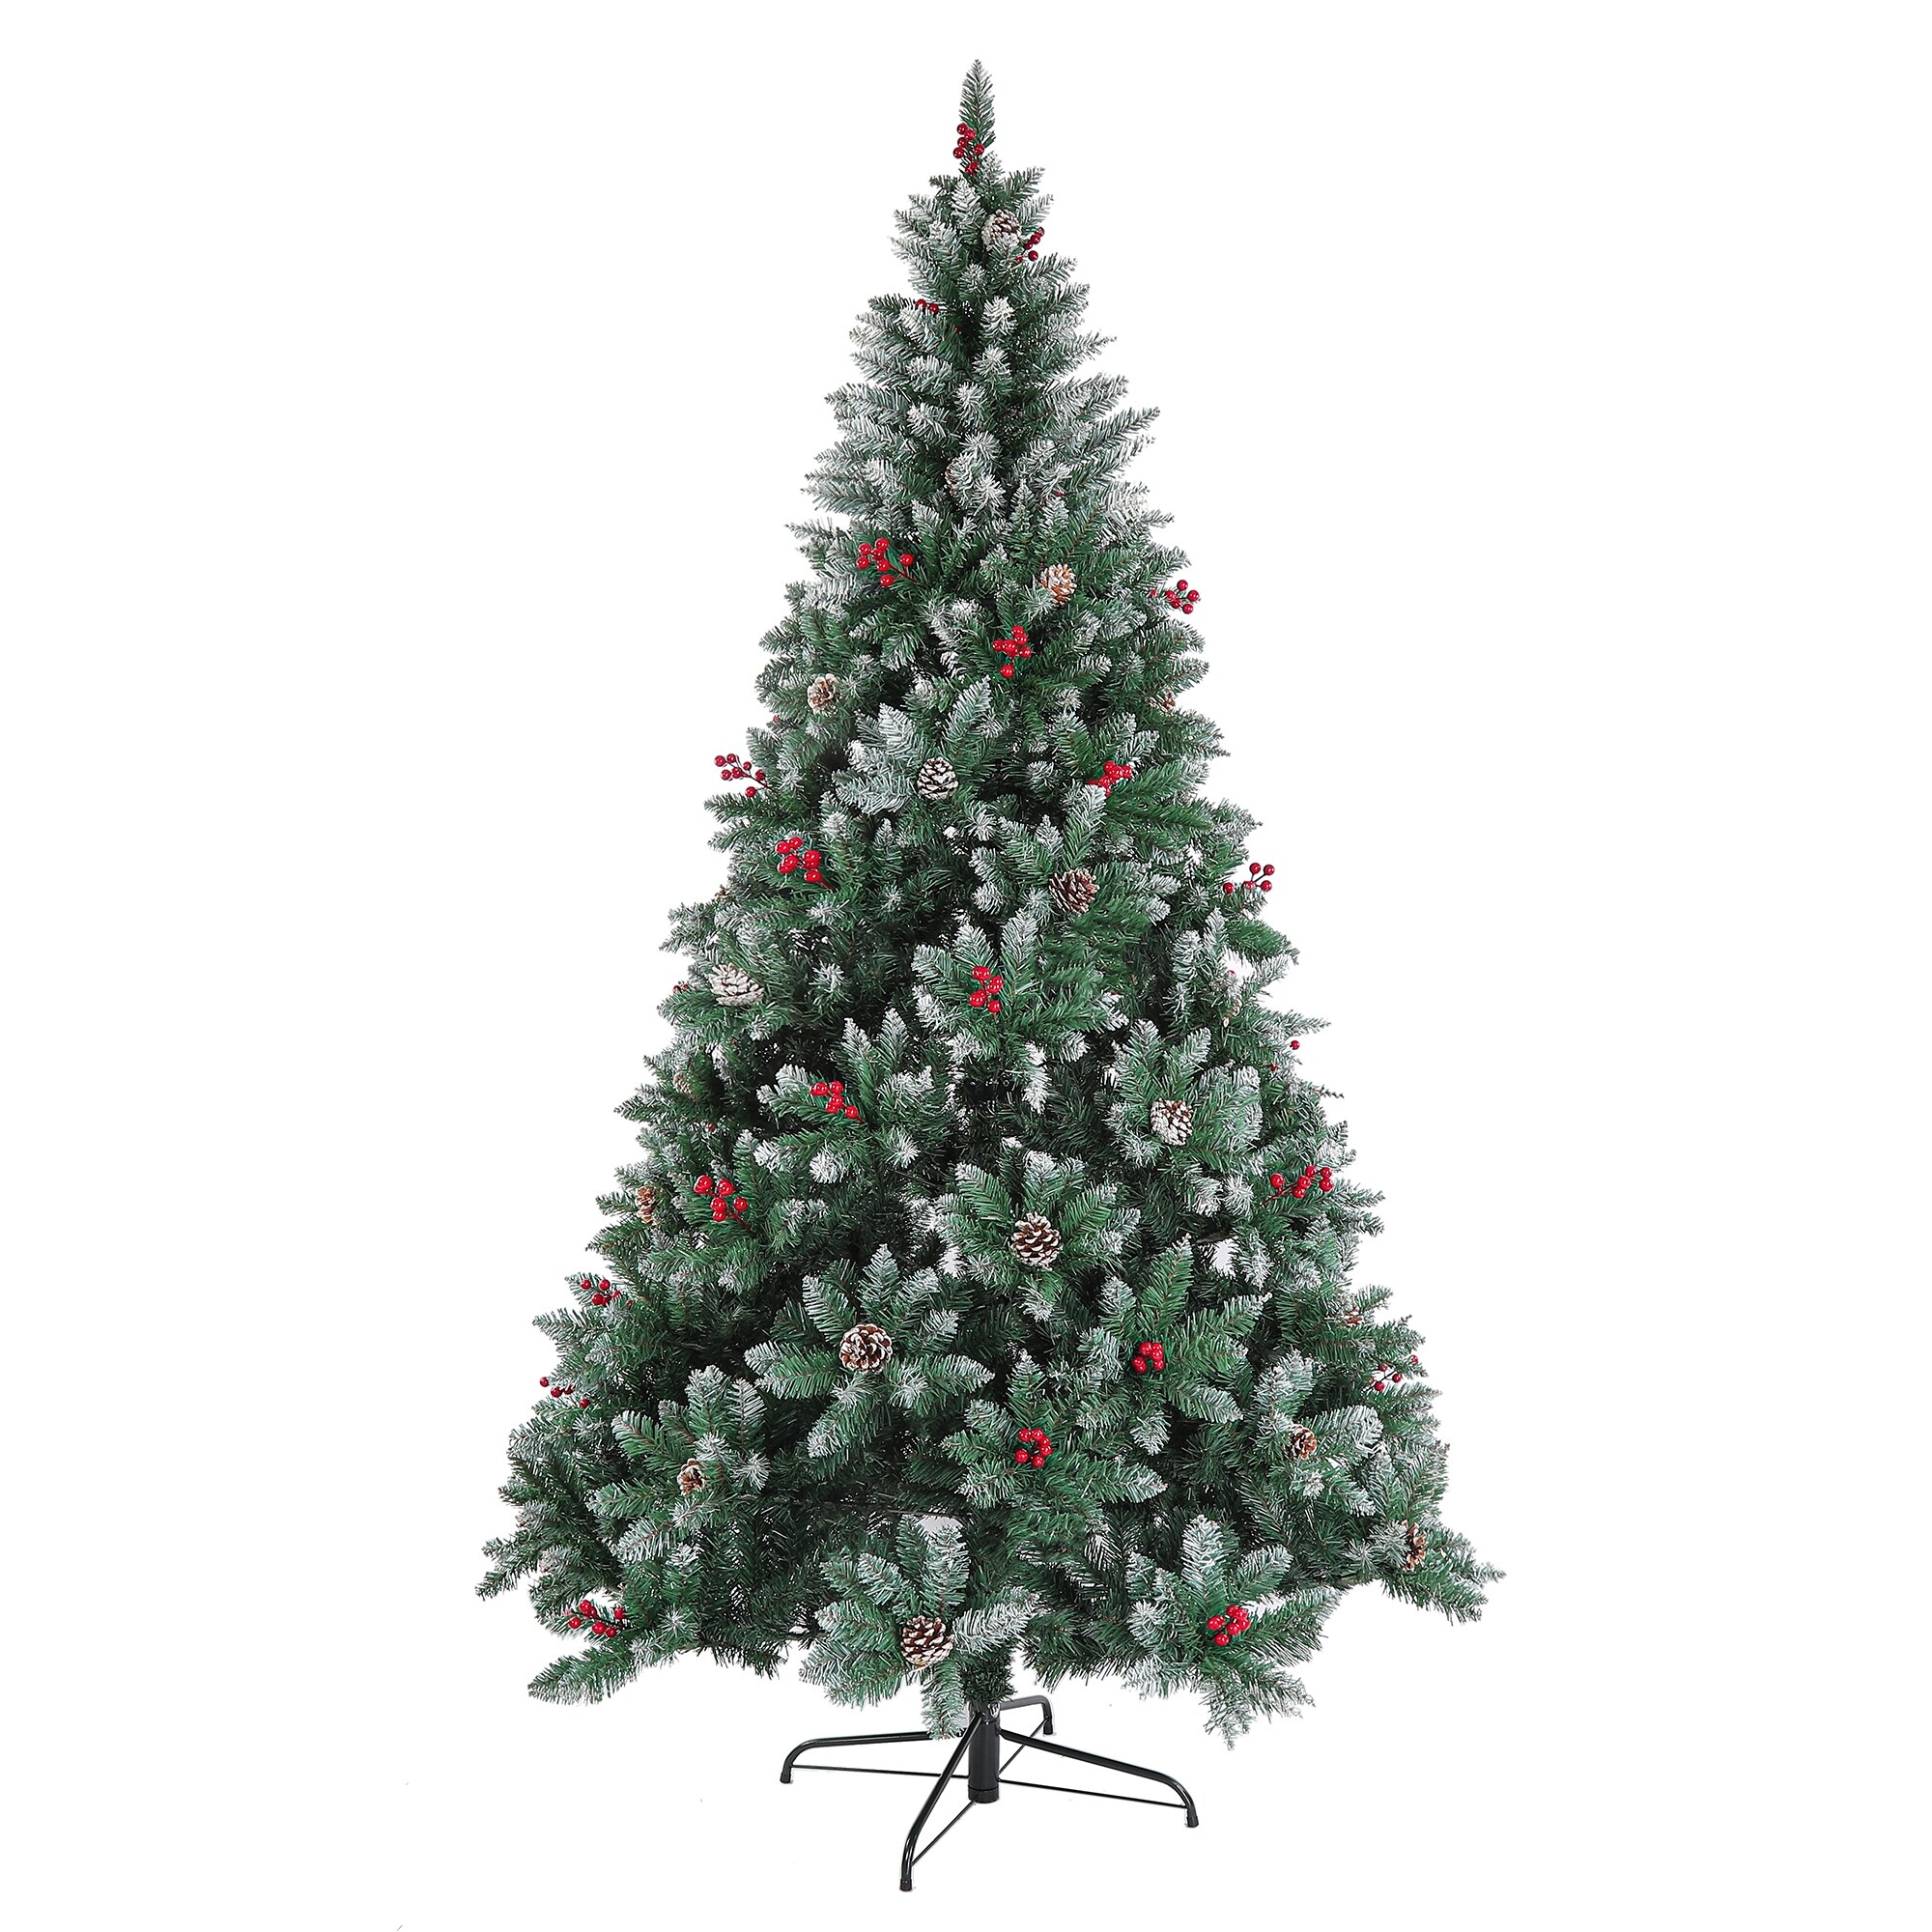 Pop Up Christmas Tree with Remote, 6ft Pull Up Christmas Tree with Lights Pre-Lit 200led Warm Lights, Artificial Xmas Trees Decorated Holiday Party